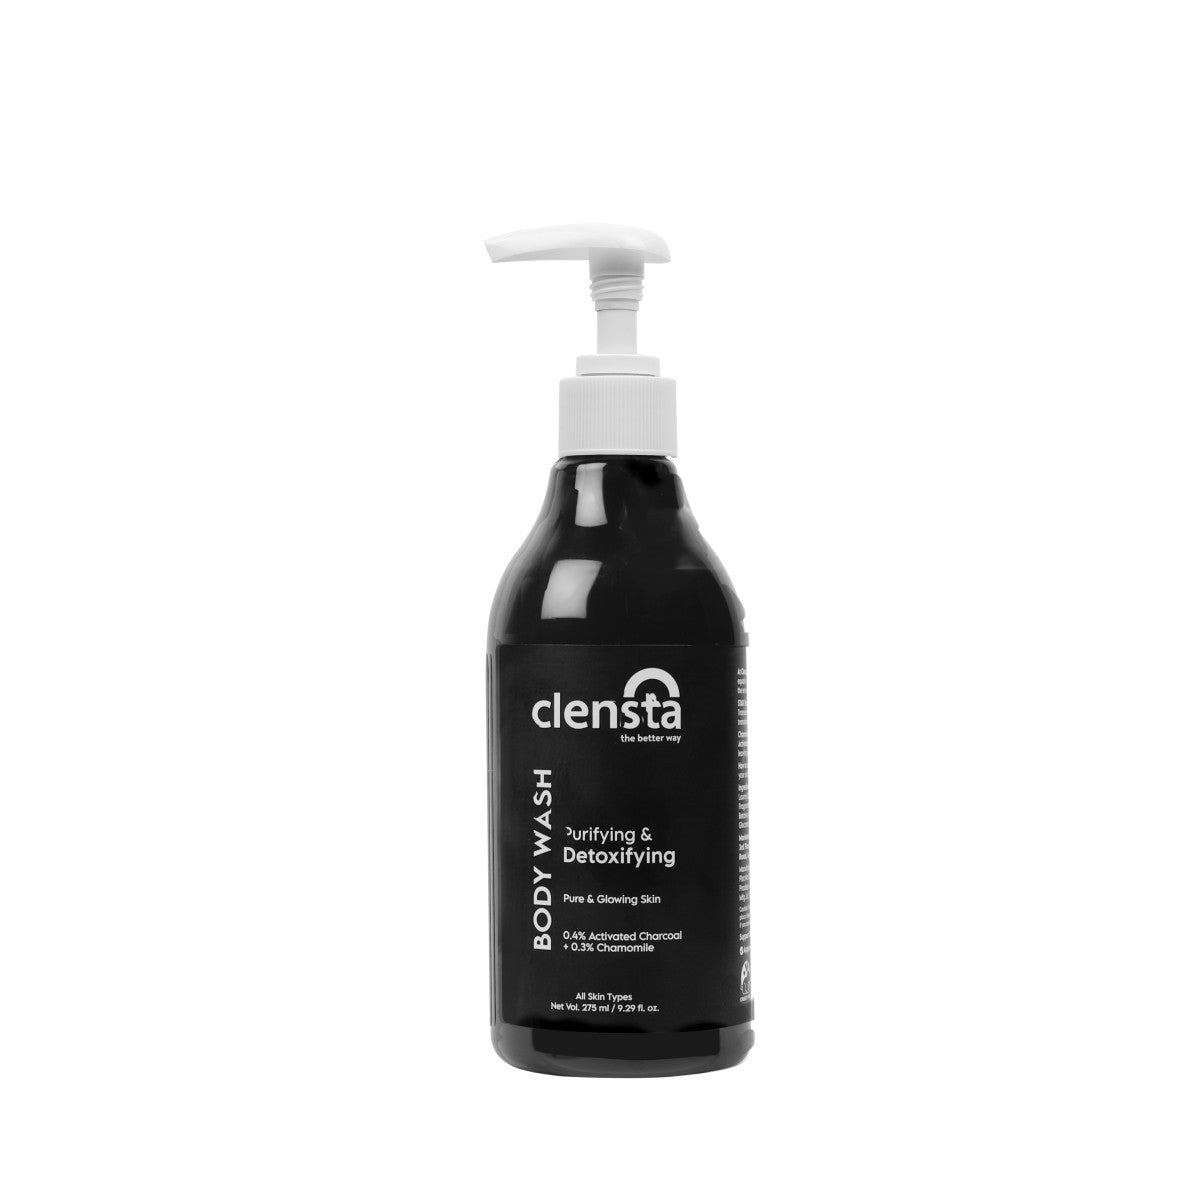 Purifying & Detoxifying Body Wash With 0.4% Activated Charcoal & 0.3% Chamomile Extract For Oil Control & Odor Protection